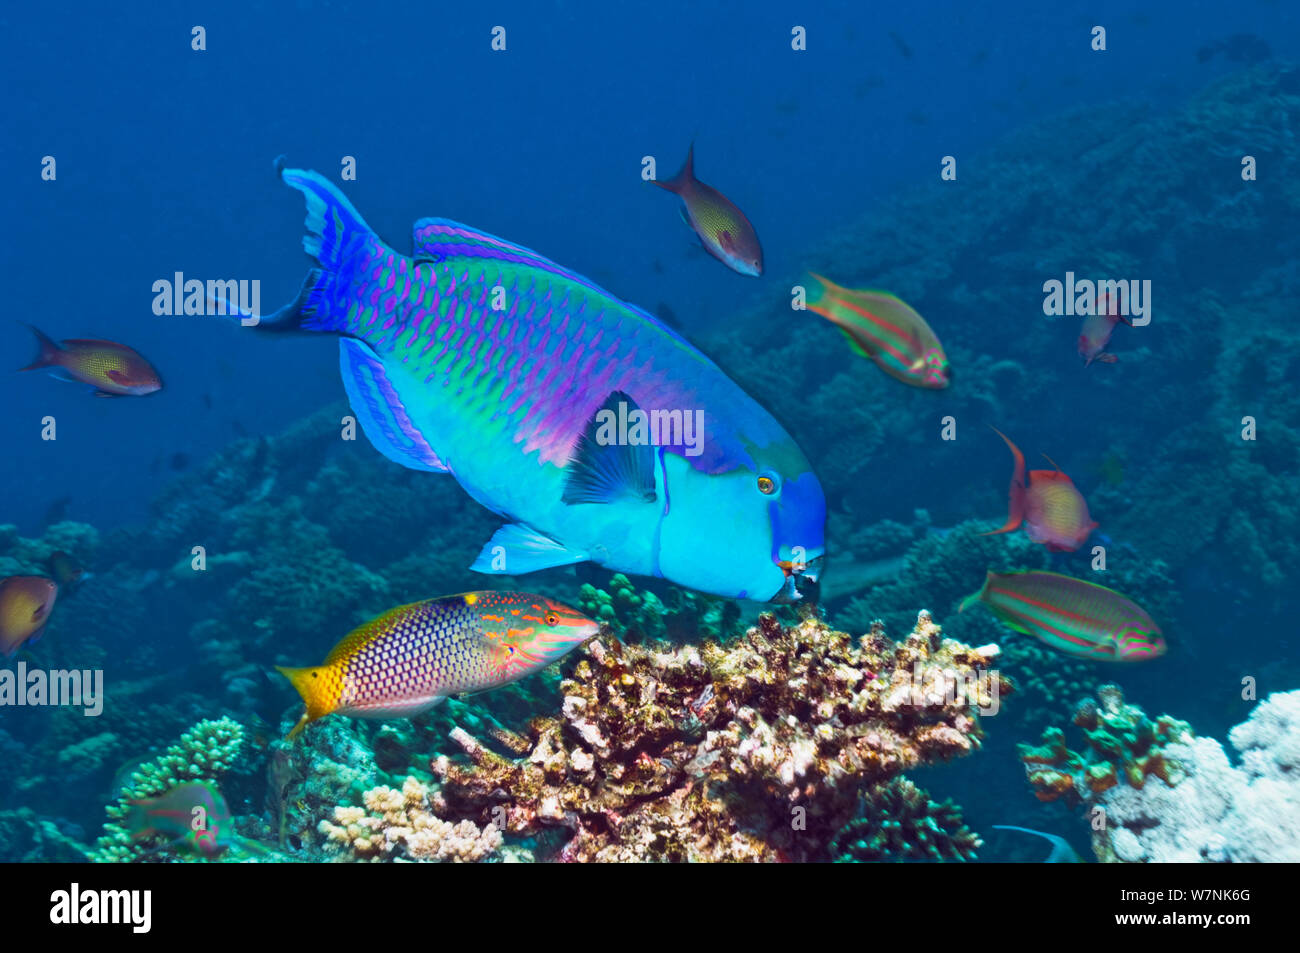 Steep headed parrotfish (Scarus gibbus), feeding male followed by a Chequerboard wrasse (Halichoeres hortulanus). Egypt, Red Sea. Stock Photo